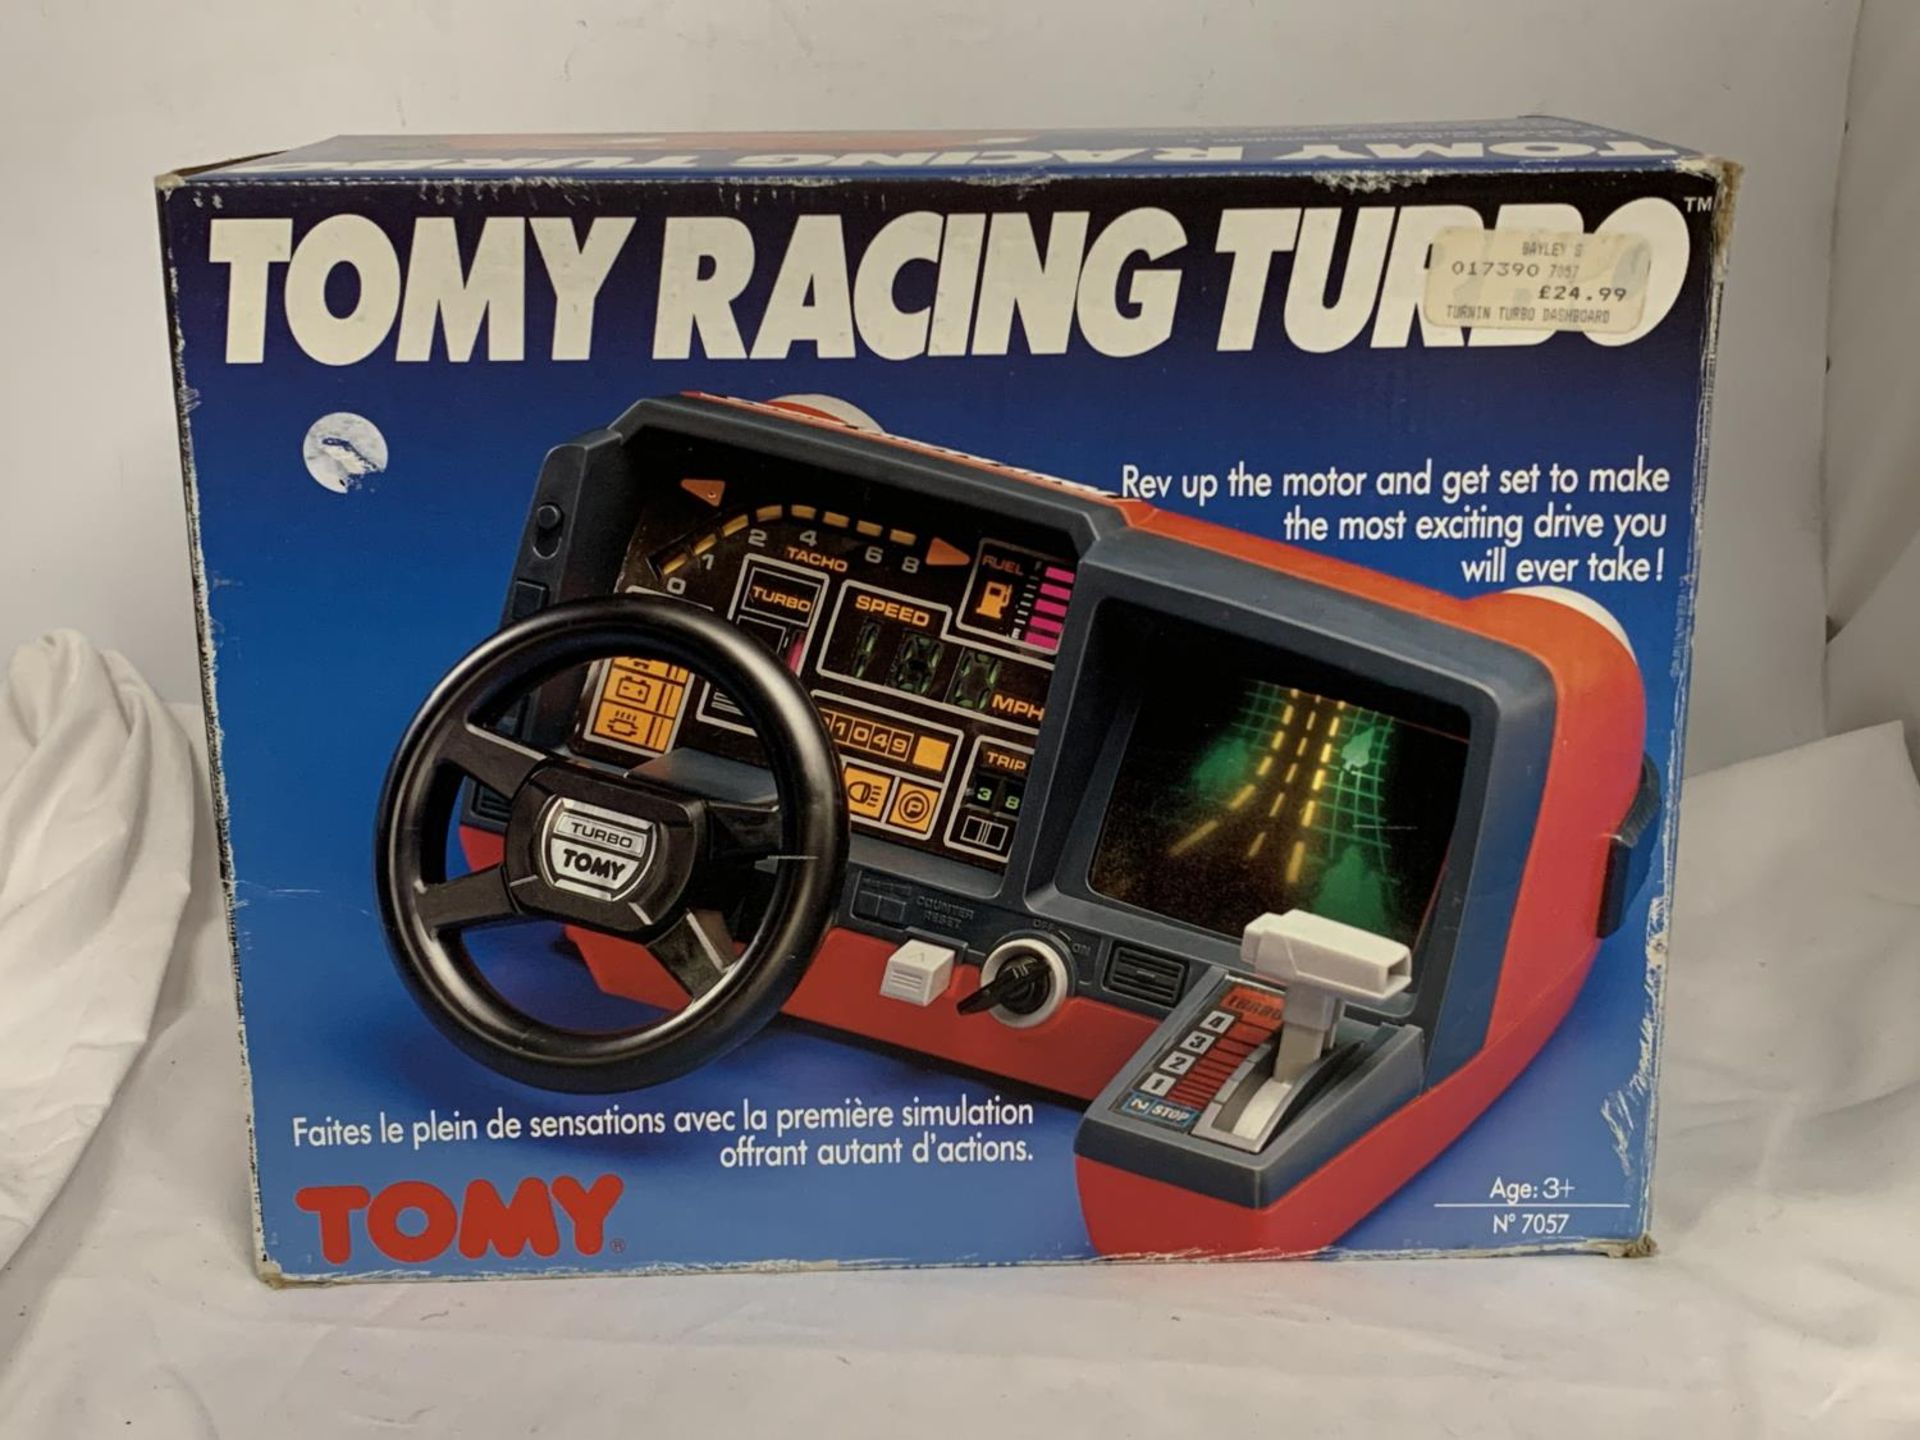 A TONY RACING TURBO DRIVING GAME